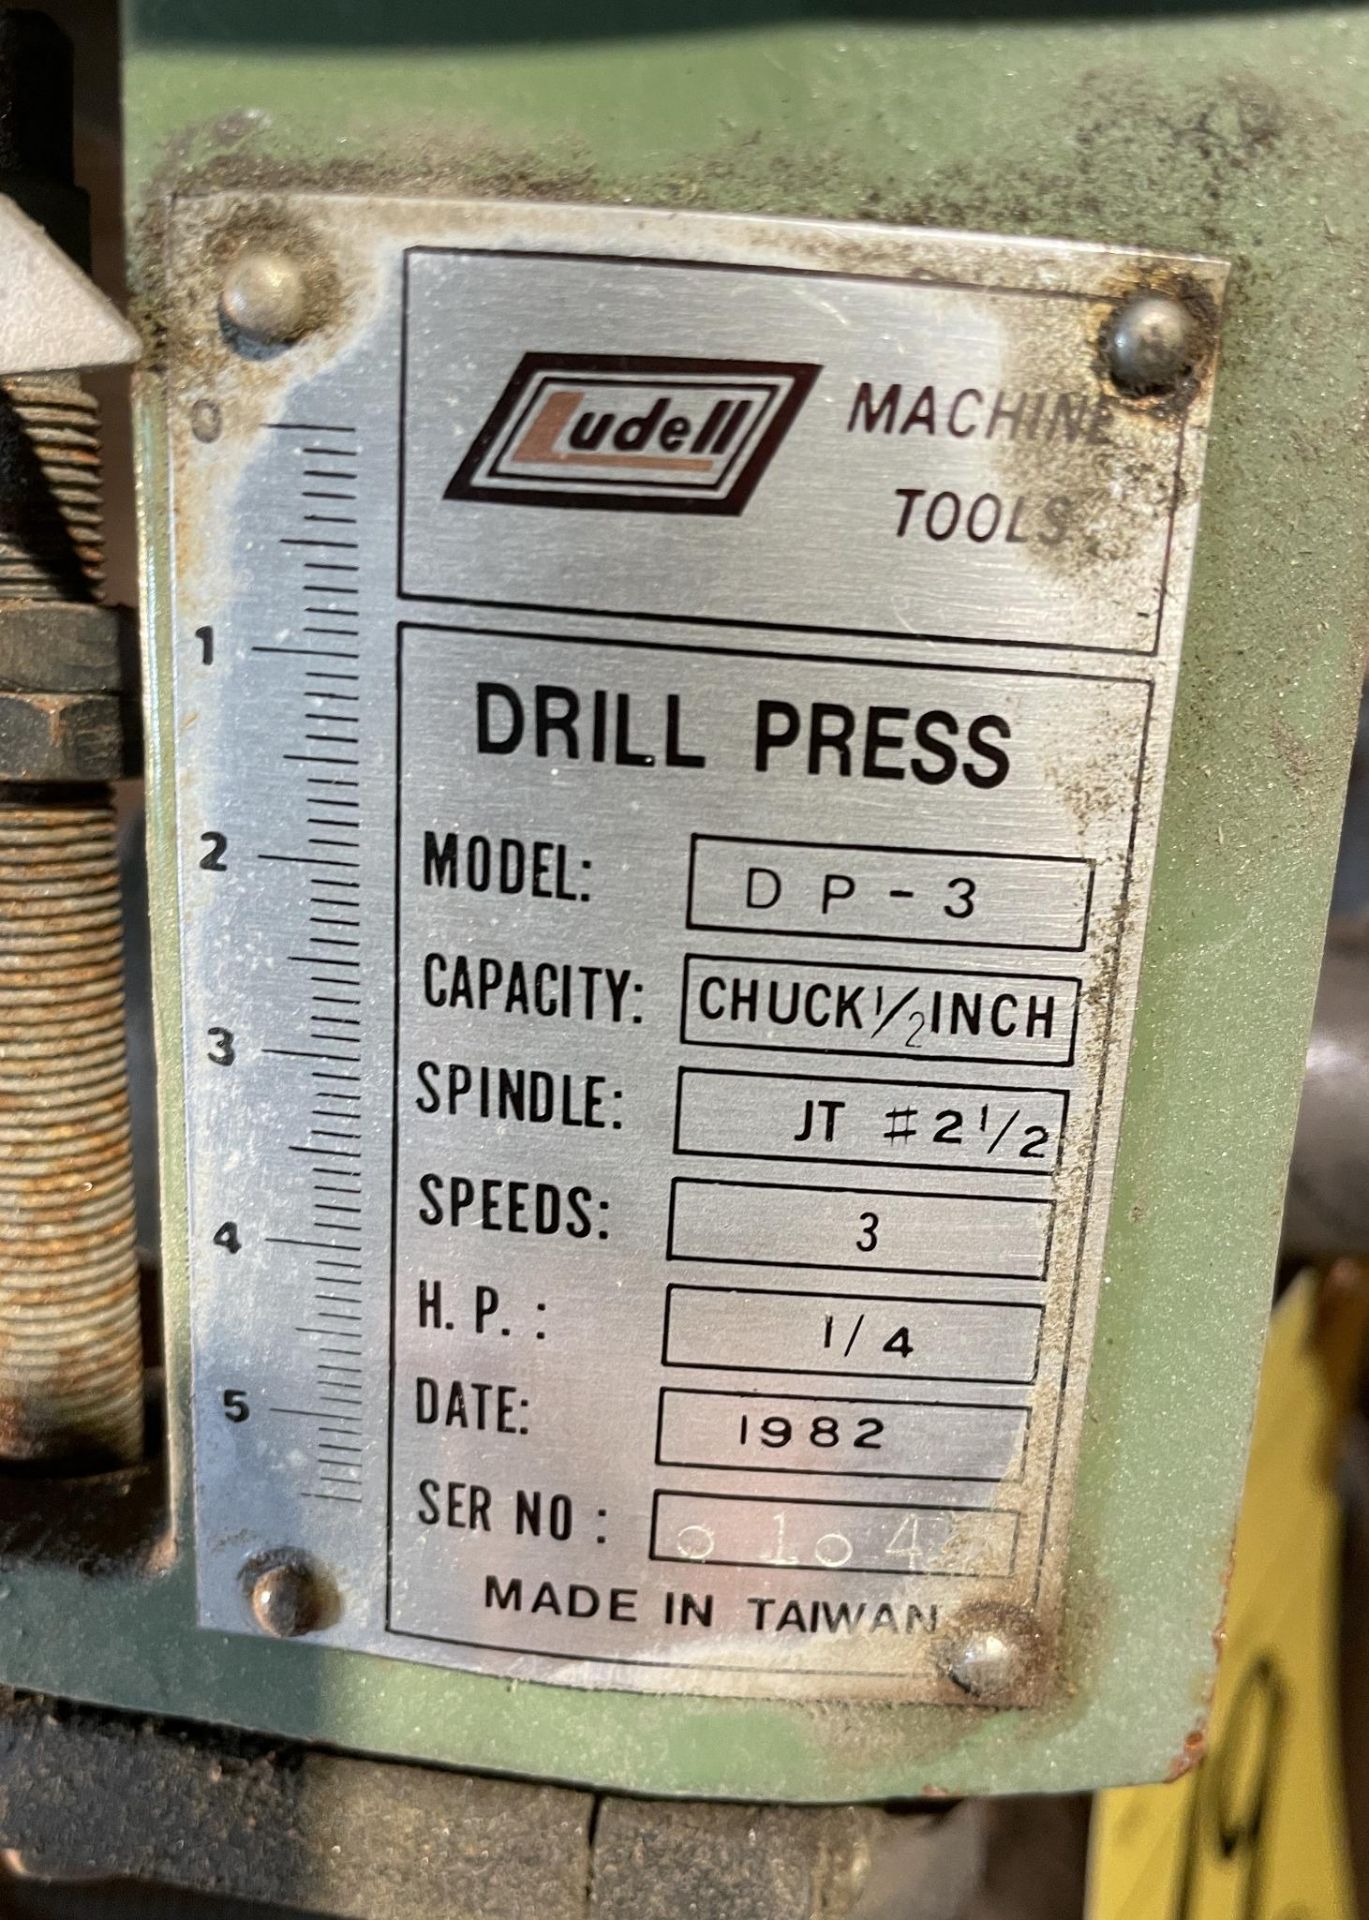 DRILL PRESS, LUDELL MDL. DP-3, 100 v., 1/2" chuck, 3-speed, 1/4 HP, S/N 01045 - Image 2 of 3